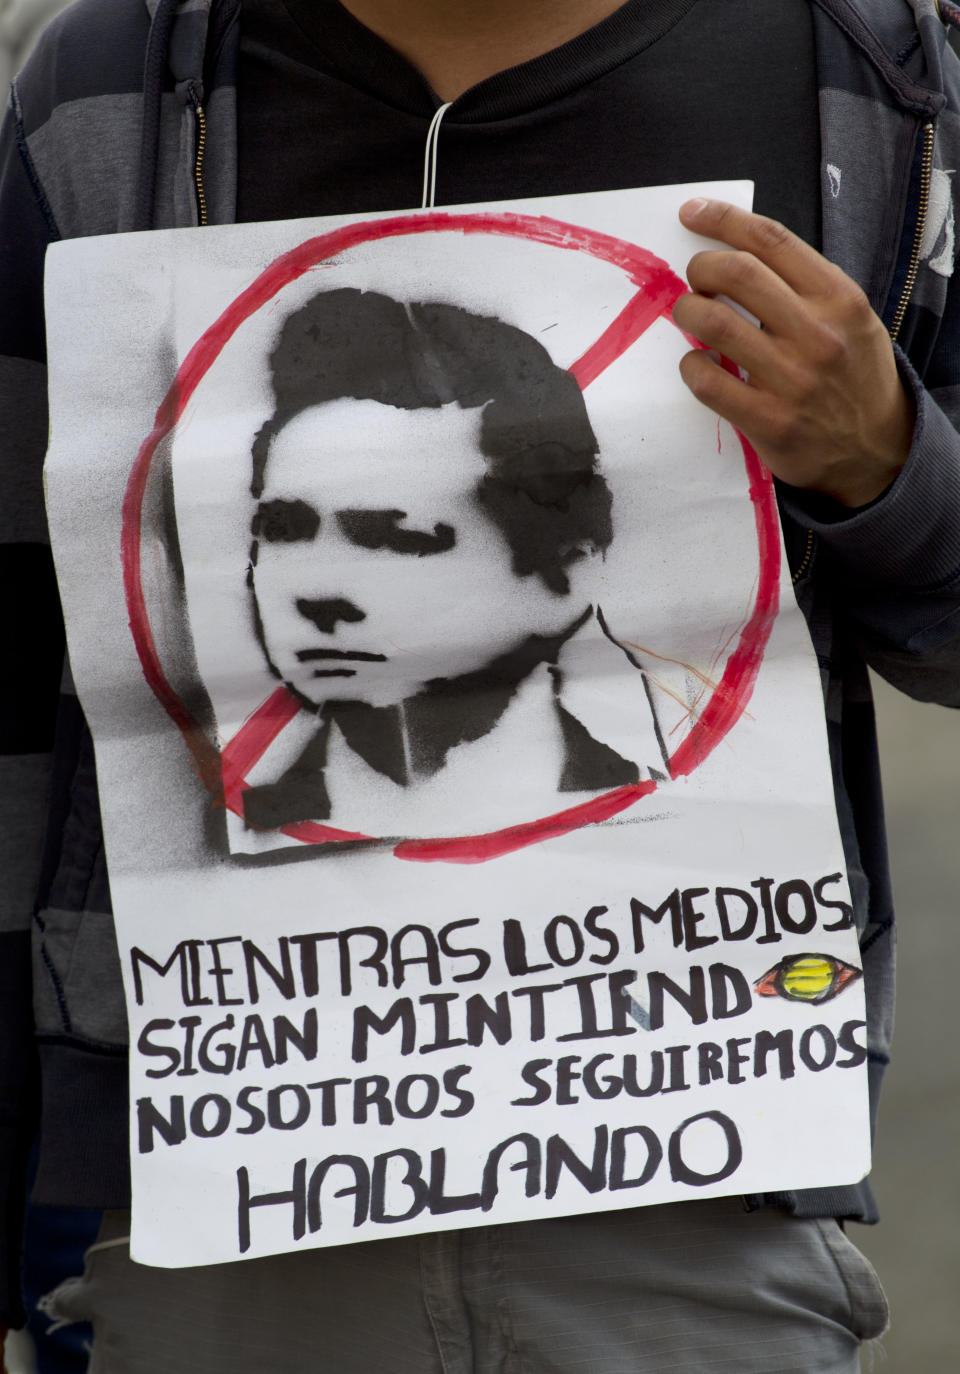 A student holds a sign during a demonstration to protest a possible return of the old ruling Institutional Revolutionary Party (PRI) and against what they perceive as a biased coverage by major Mexican TV networks directed in favor of PRI's candidate Enrique Pena Nieto in Mexico City, Wednesday, May 23, 2012. Mexico will hold presidential elections on July 1. The banner depicting Pena Nieto reads in Spanish: "While the media keeps lying, we will keep speaking." (AP Photo/Eduardo Verdugo)